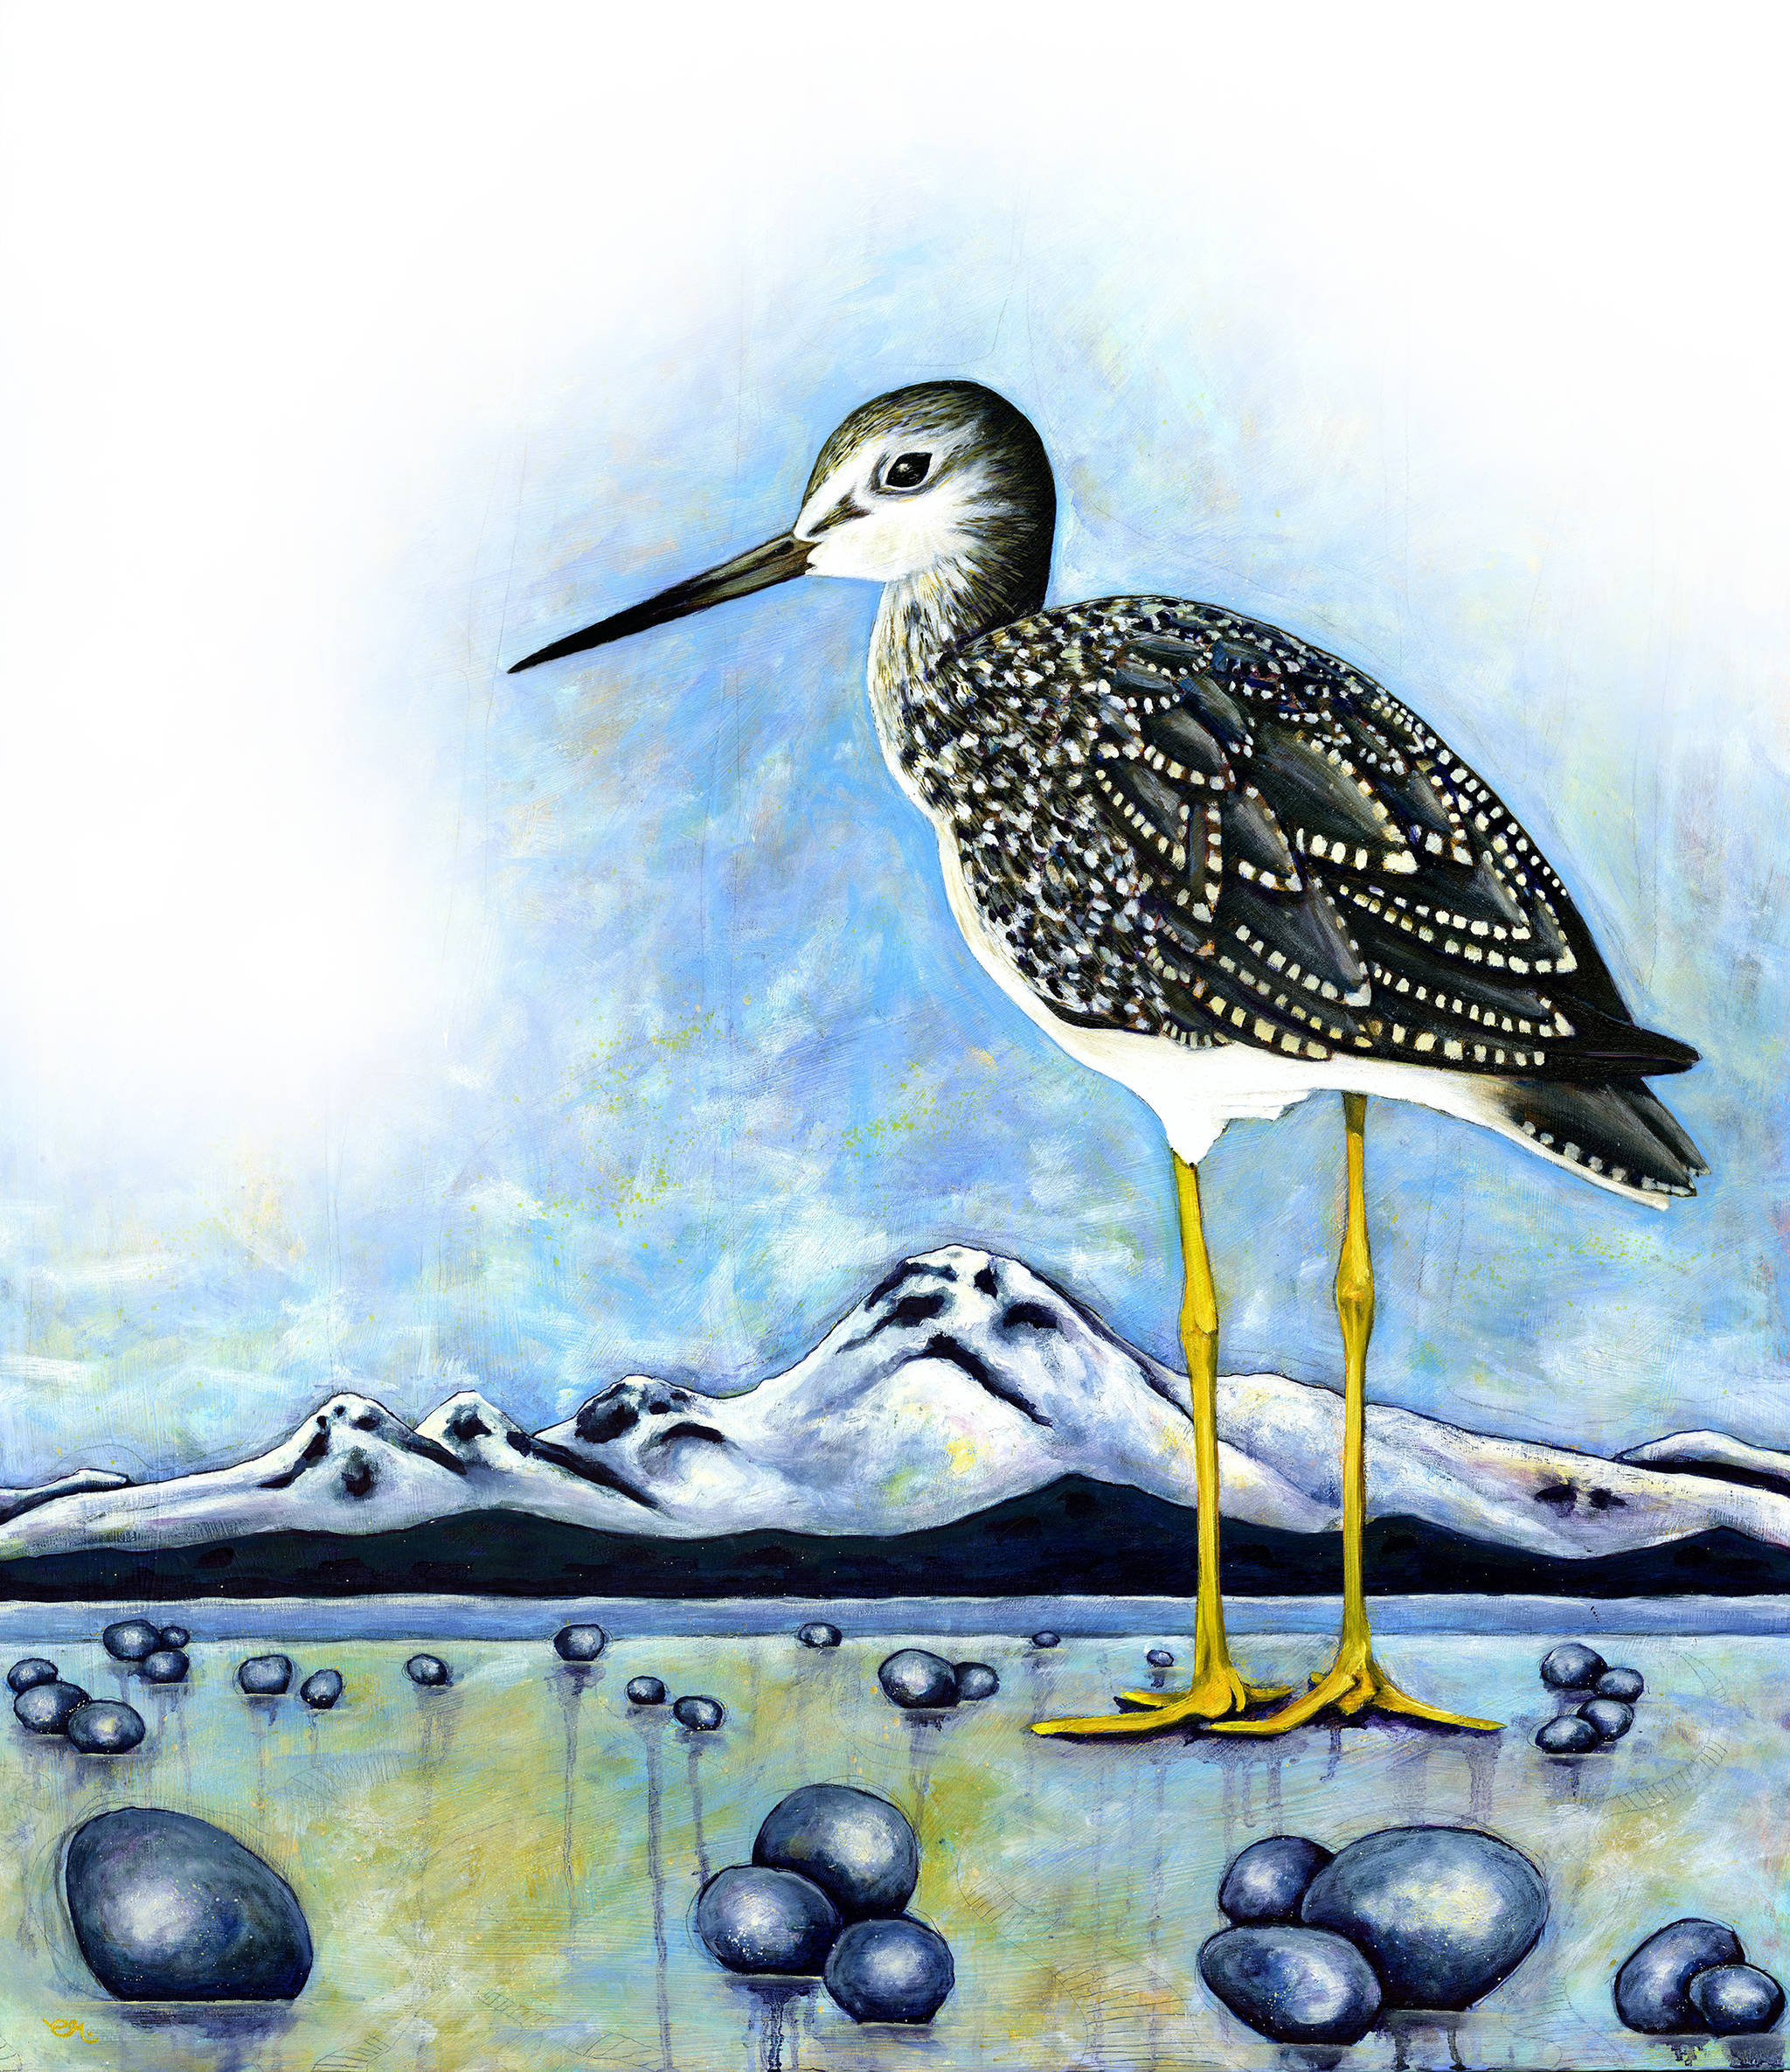 Erin Rae D’Eimon’s painting for the 26th annual Kachemak Bay Shorebird Festival features a greater yellowlegs towering over Iliamna Volcano. (Photo provided)